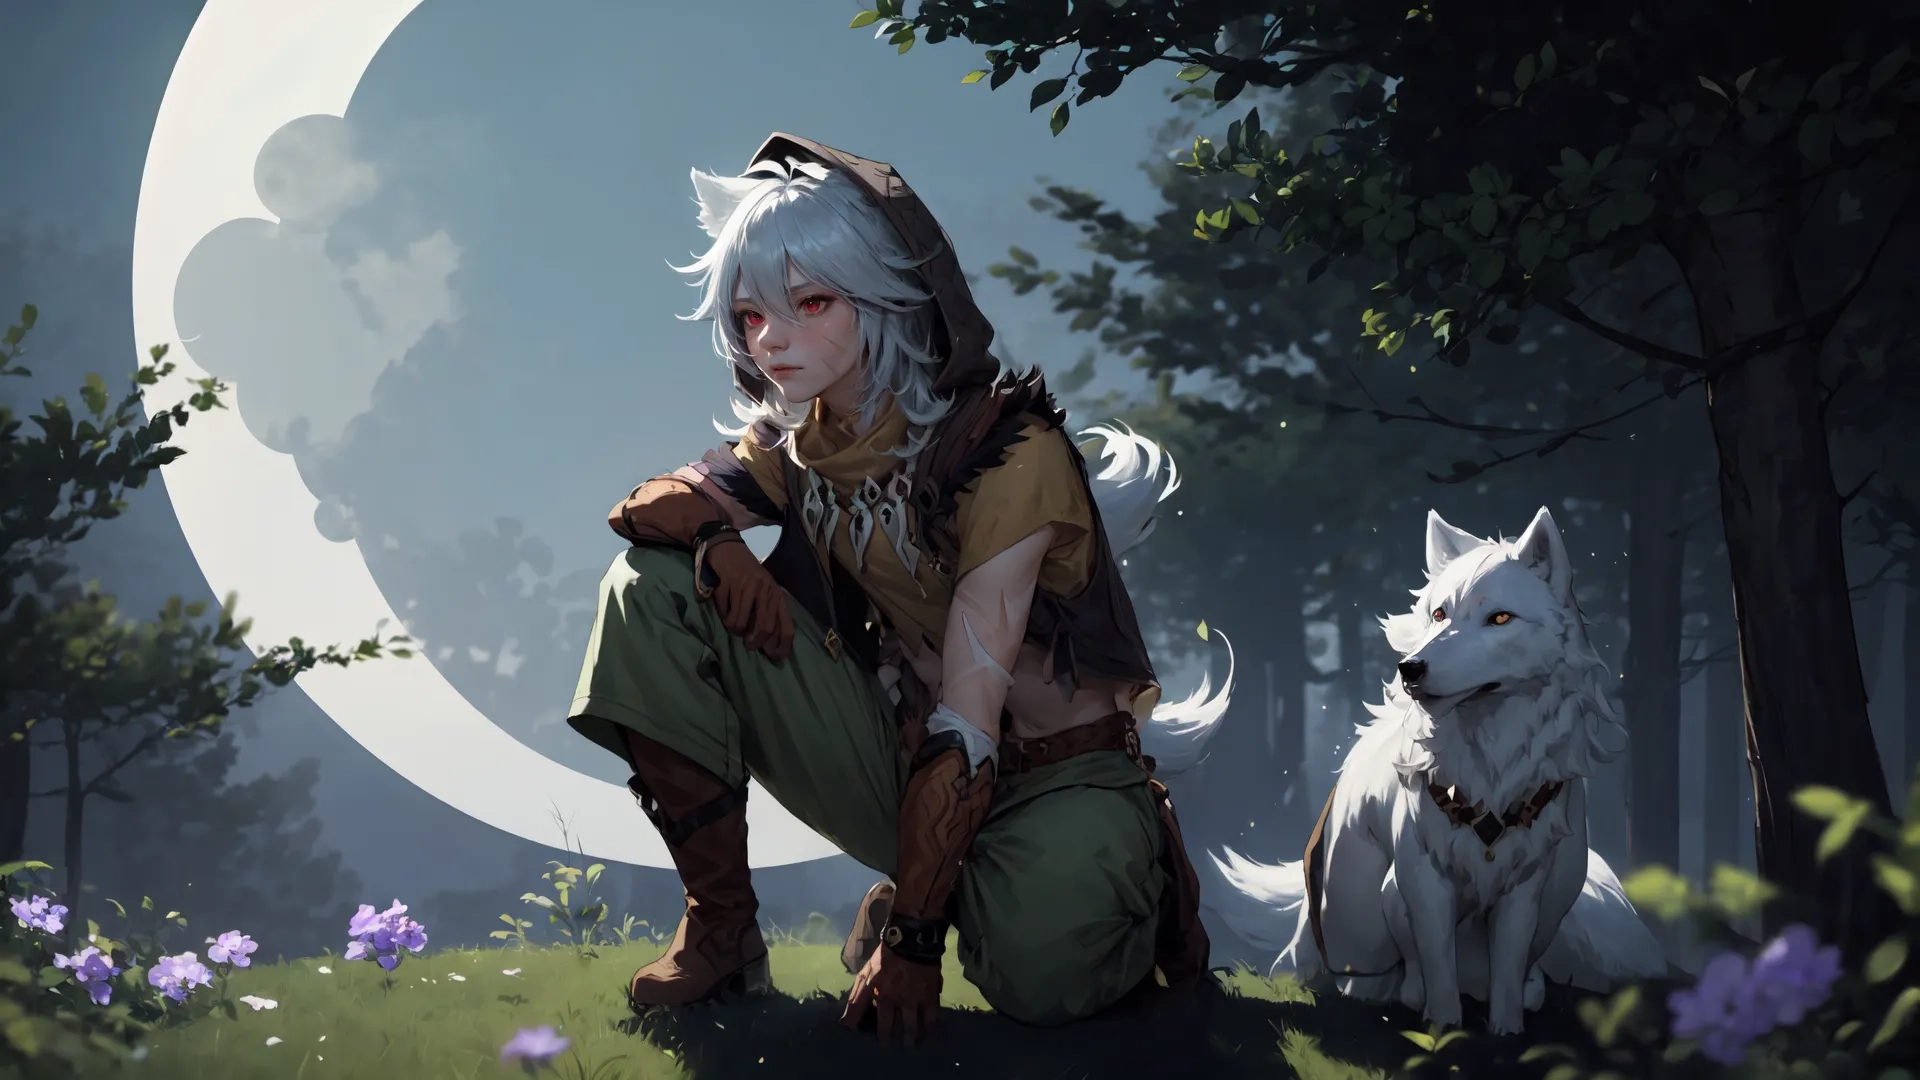 two foxes sitting next to each other looking at the moon, with a woman in green clothing crouch on the ground next to them and two small grey dogs sitting beside
